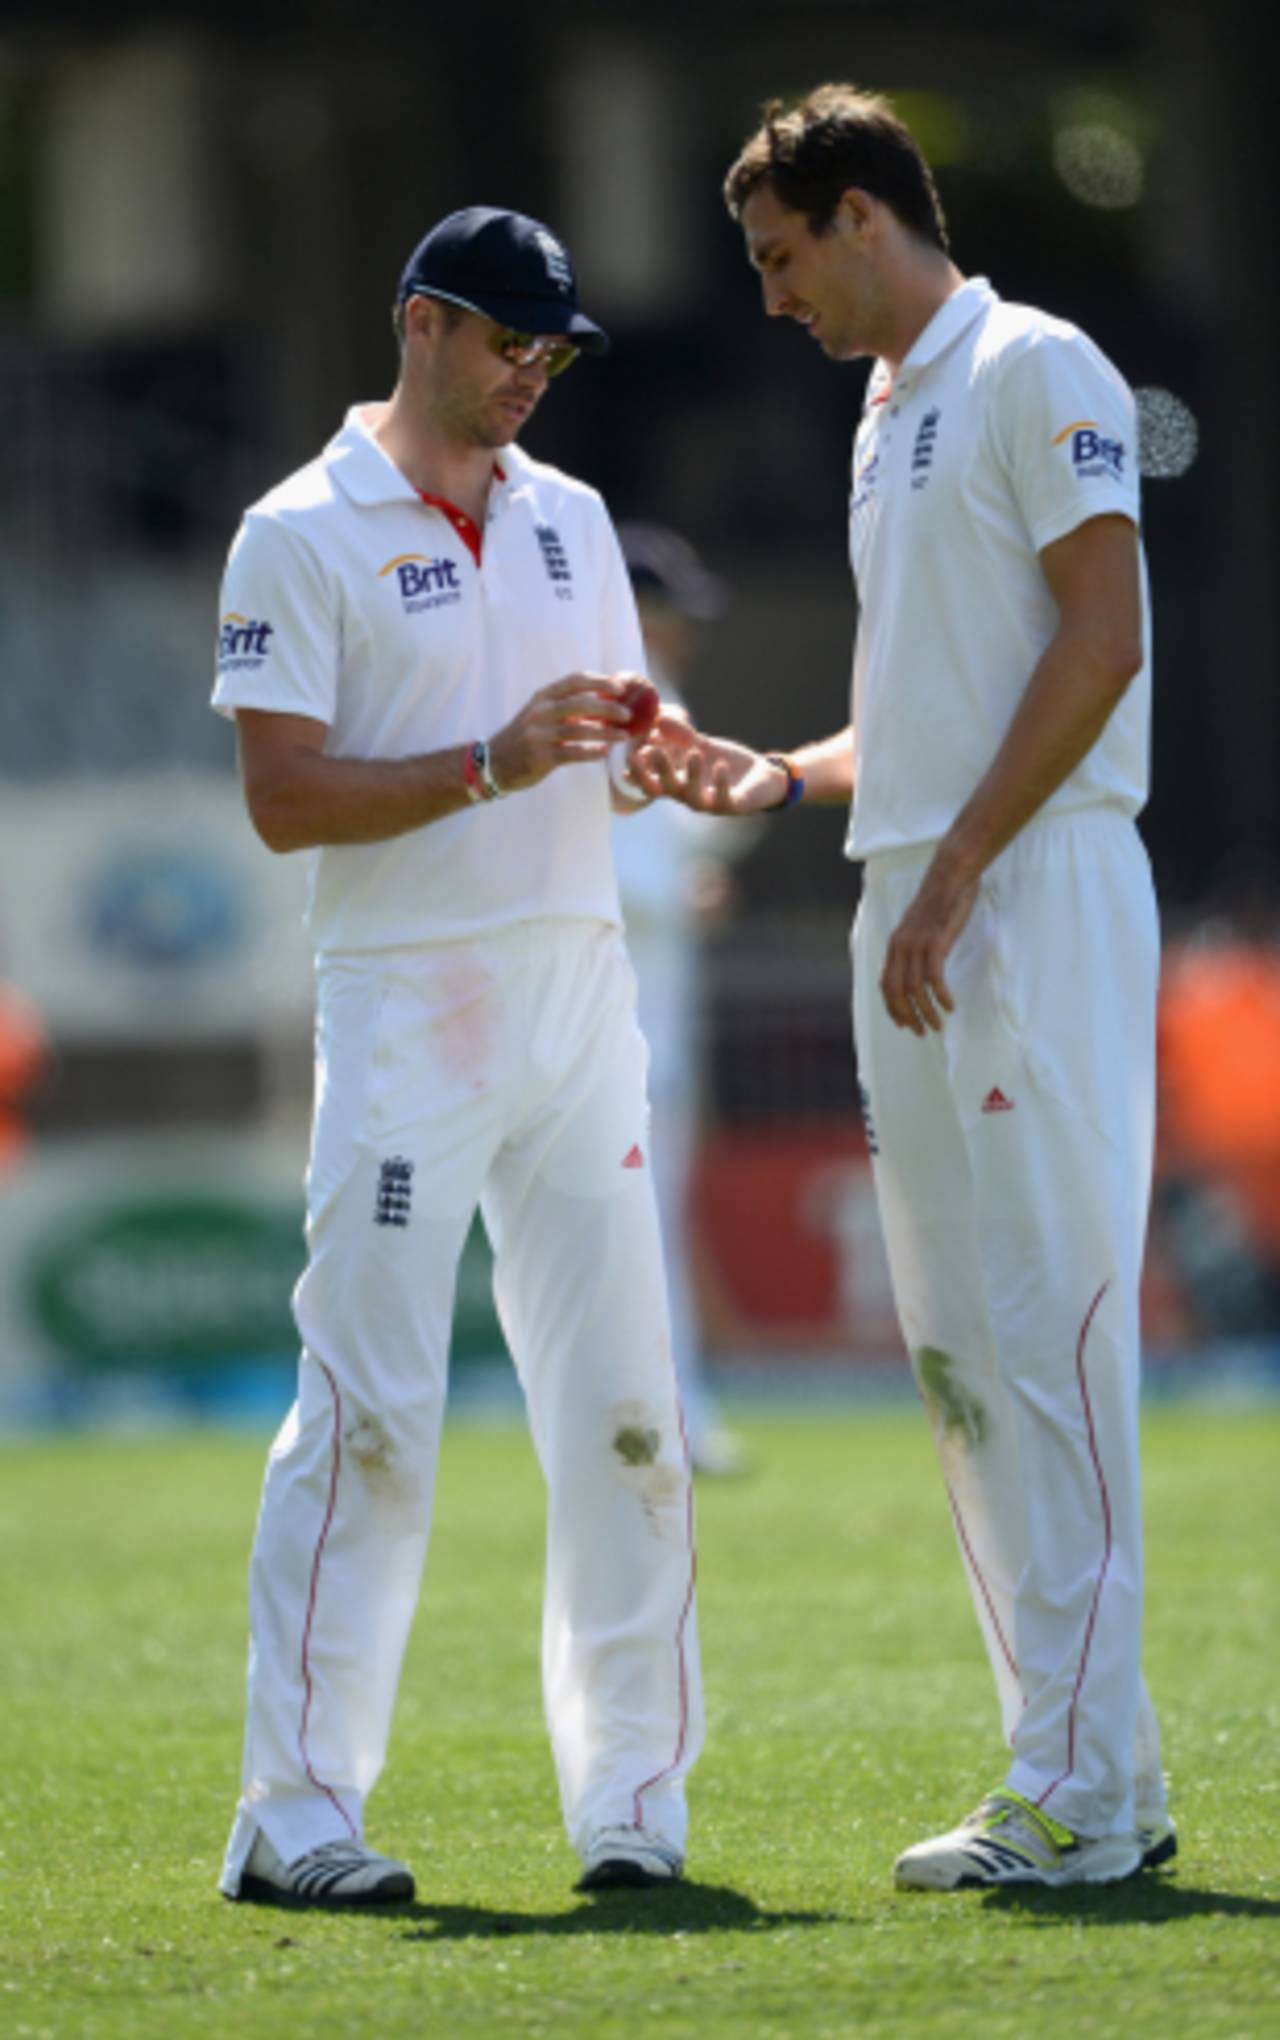 James Anderson and Steven Finn inspect the ball, New Zealand v England, 3rd Test, Auckland, 1st day, March 22, 2013